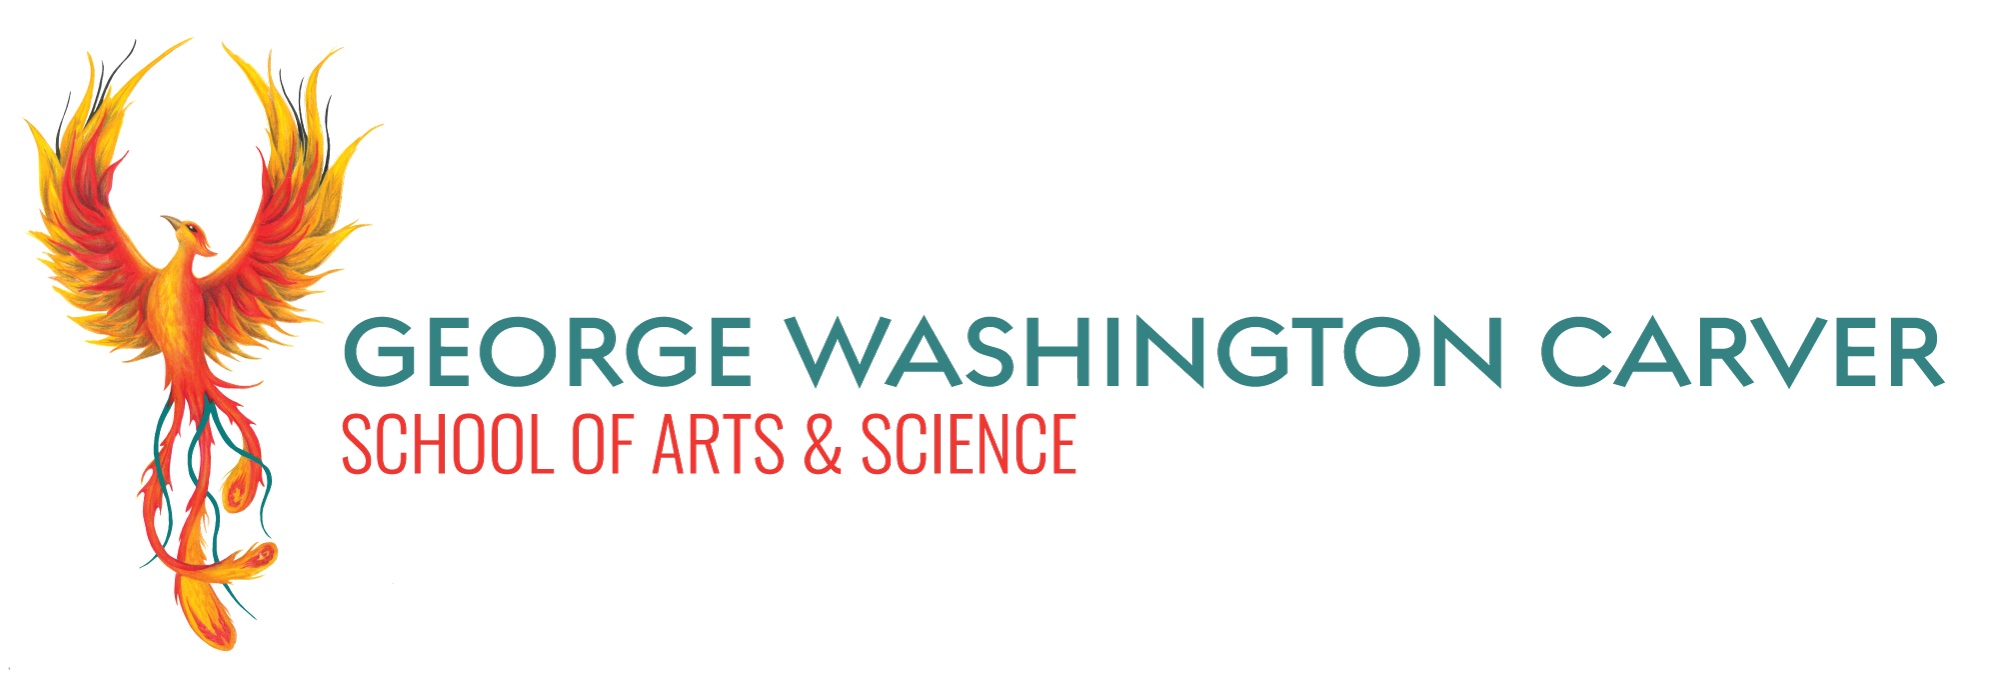 George Washington Carver School of Arts and Science